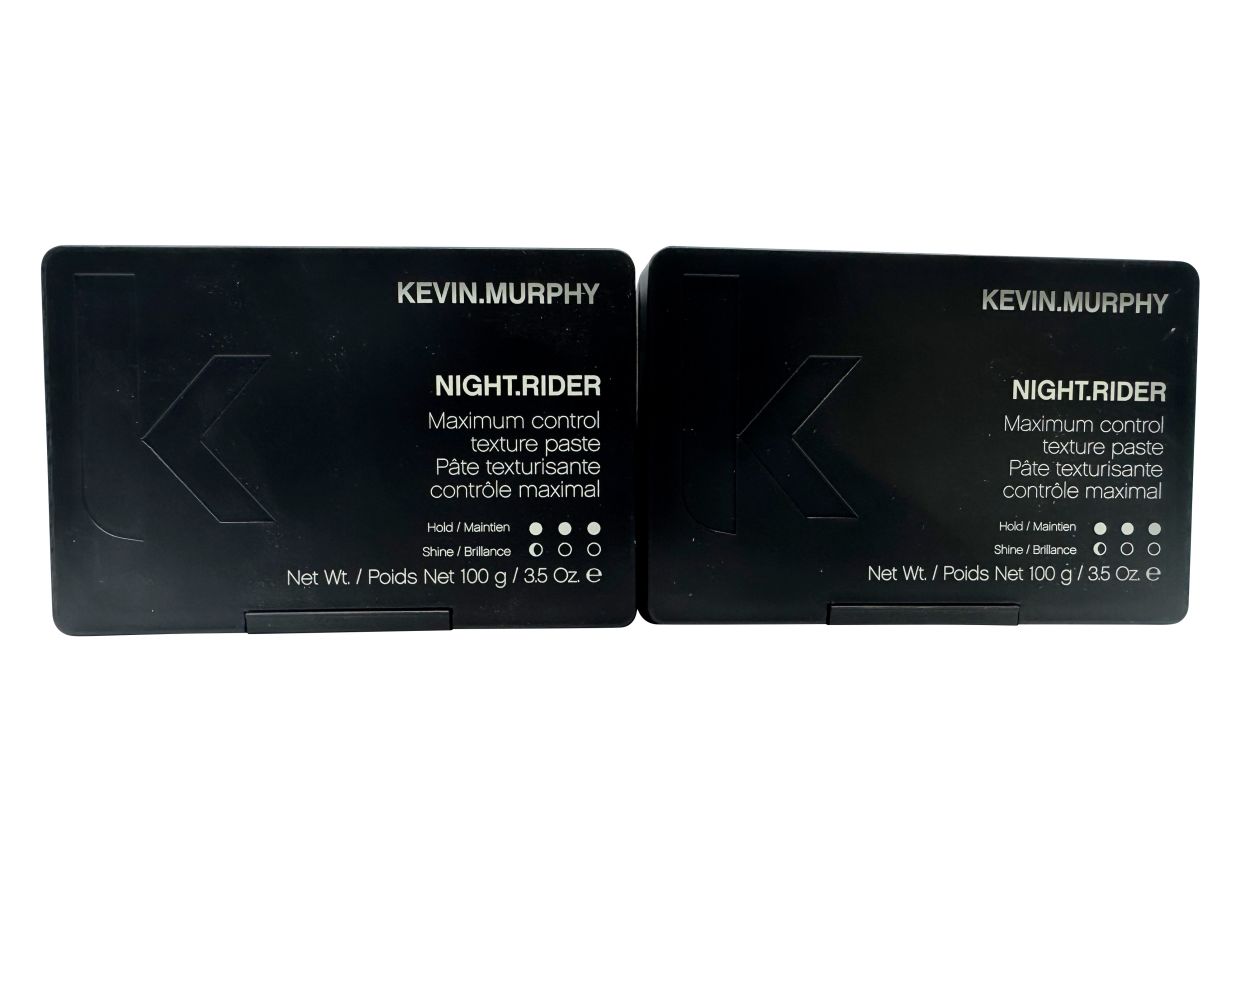 Kevin Murphy Night Rider Maximum Control Texture Paste Pack of 2